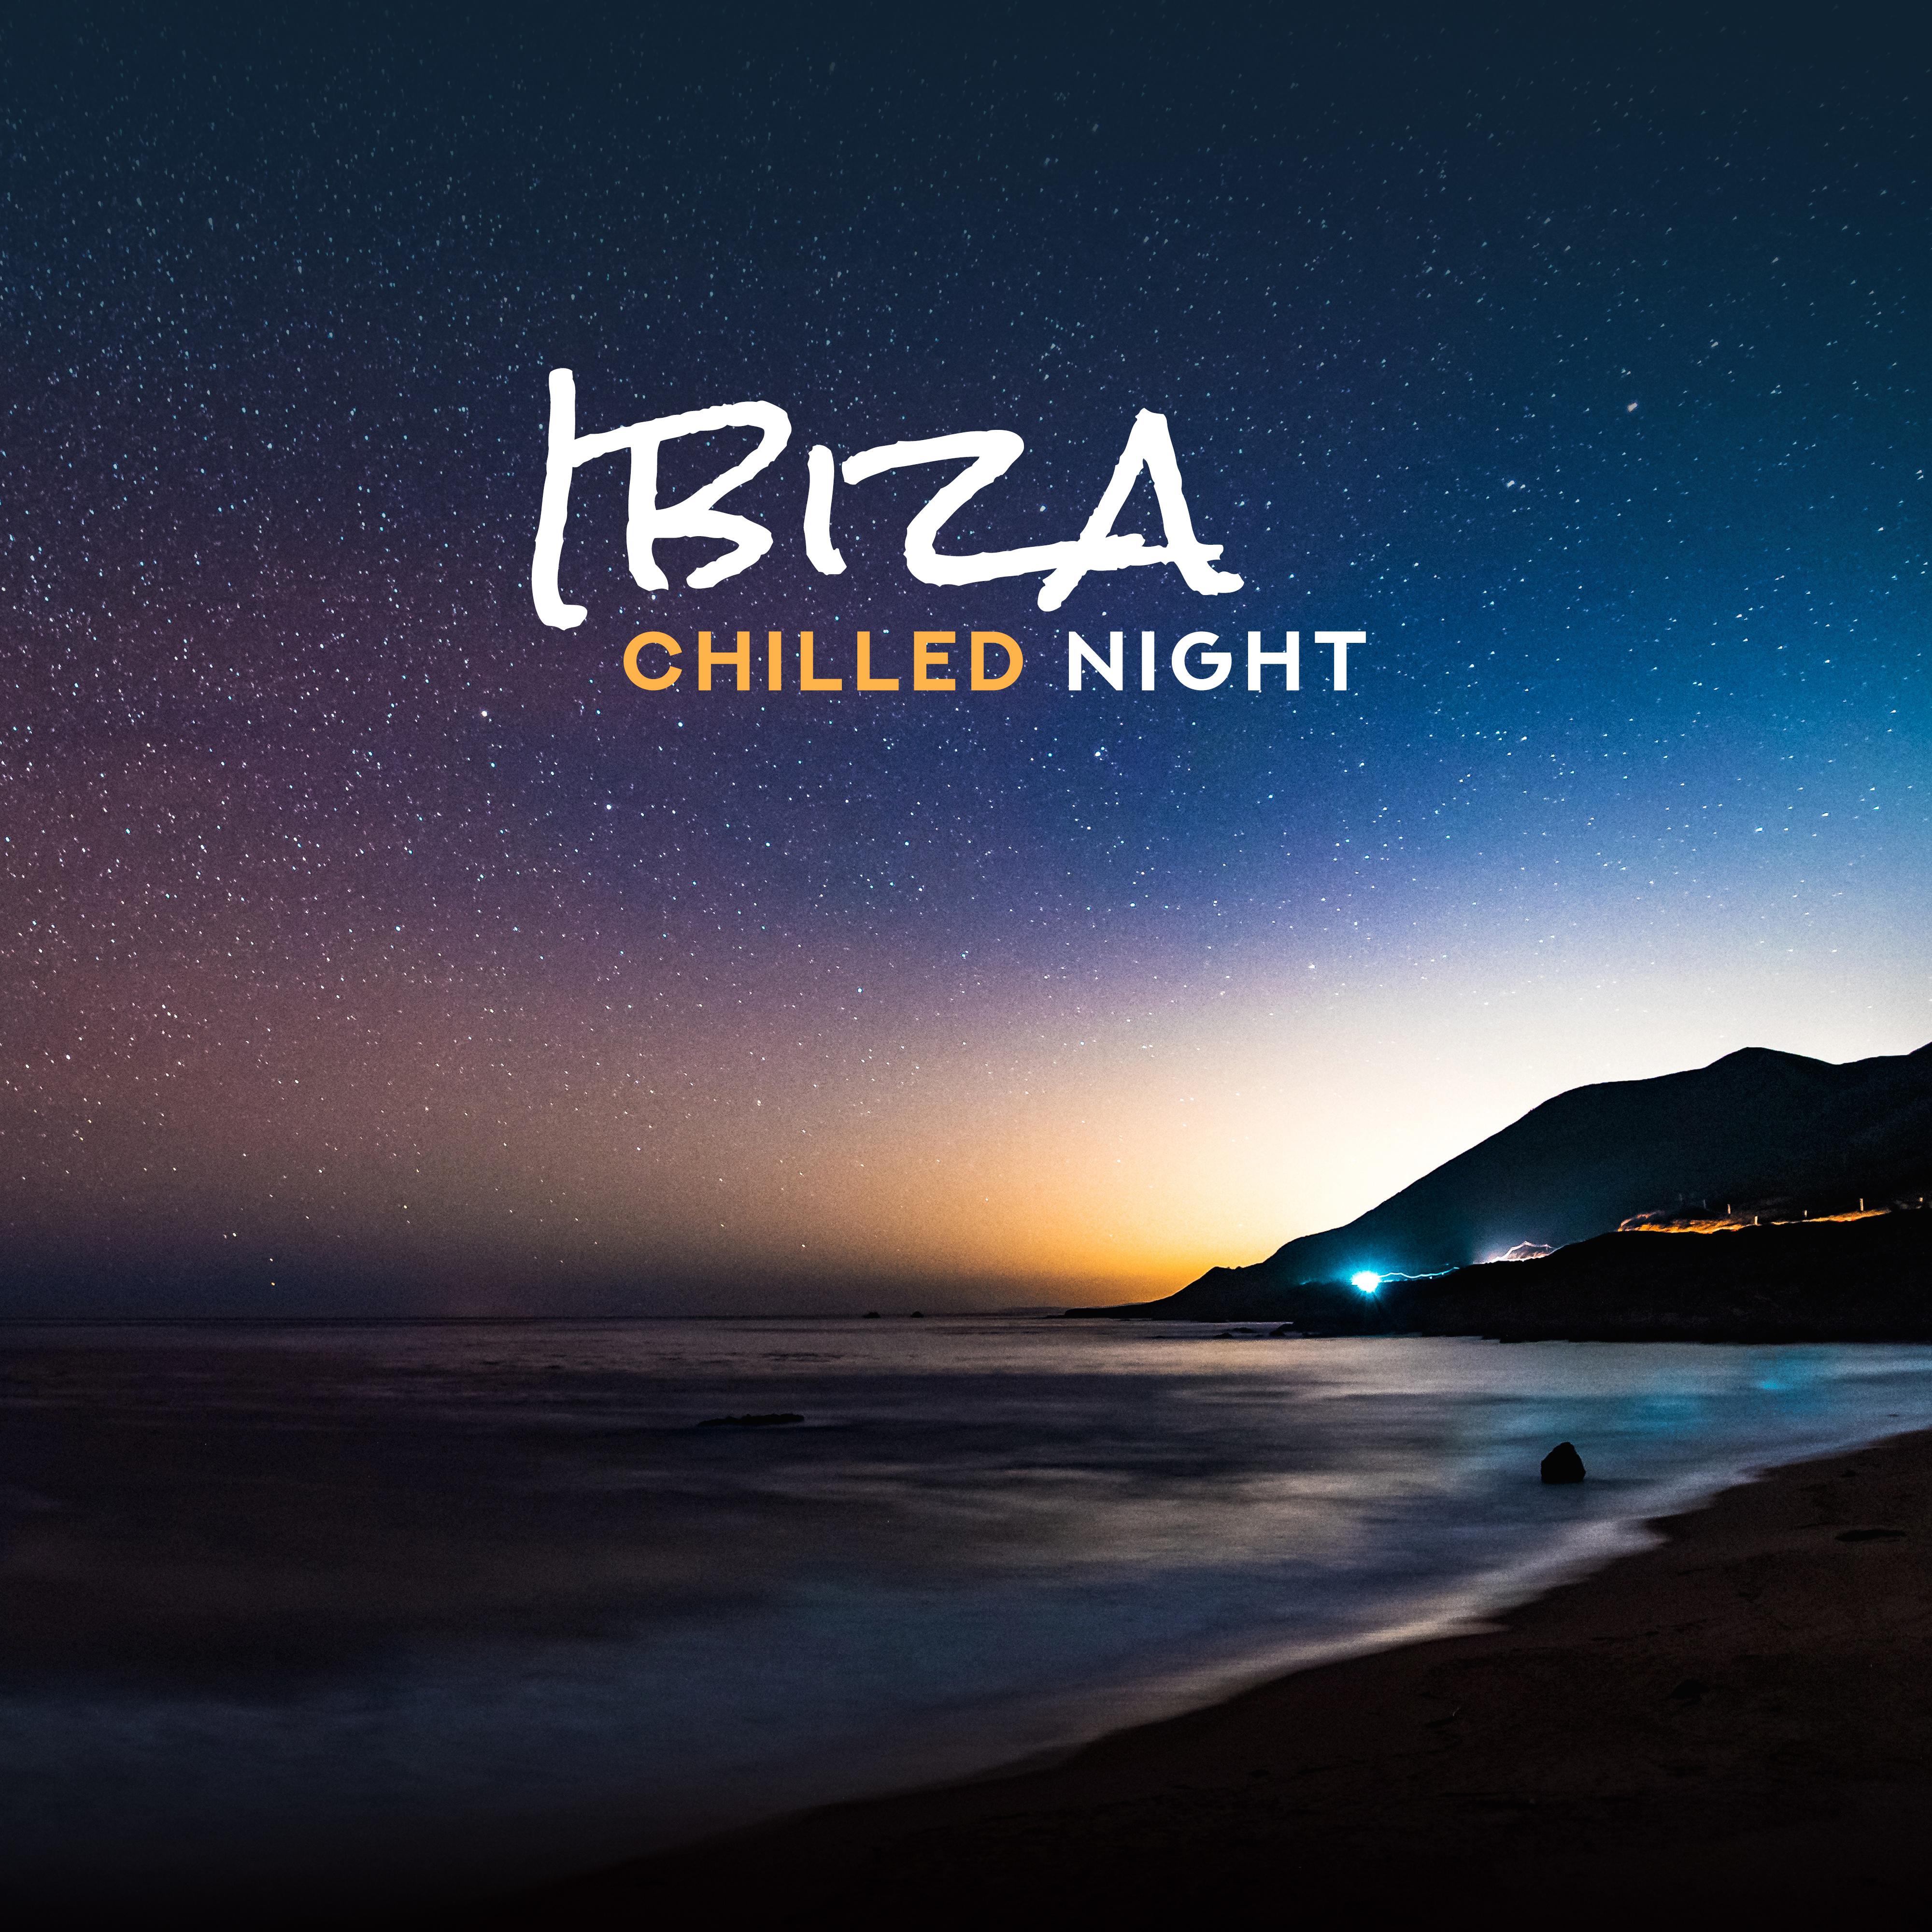 Ibiza Chilled Night: Compilation of Fresh 2019 Chillout Electronic Music for Ibiza Club, Slow Party Beats with Ambient Melodies, Afterparty Chill Songs, Summer Holiday Bacckground